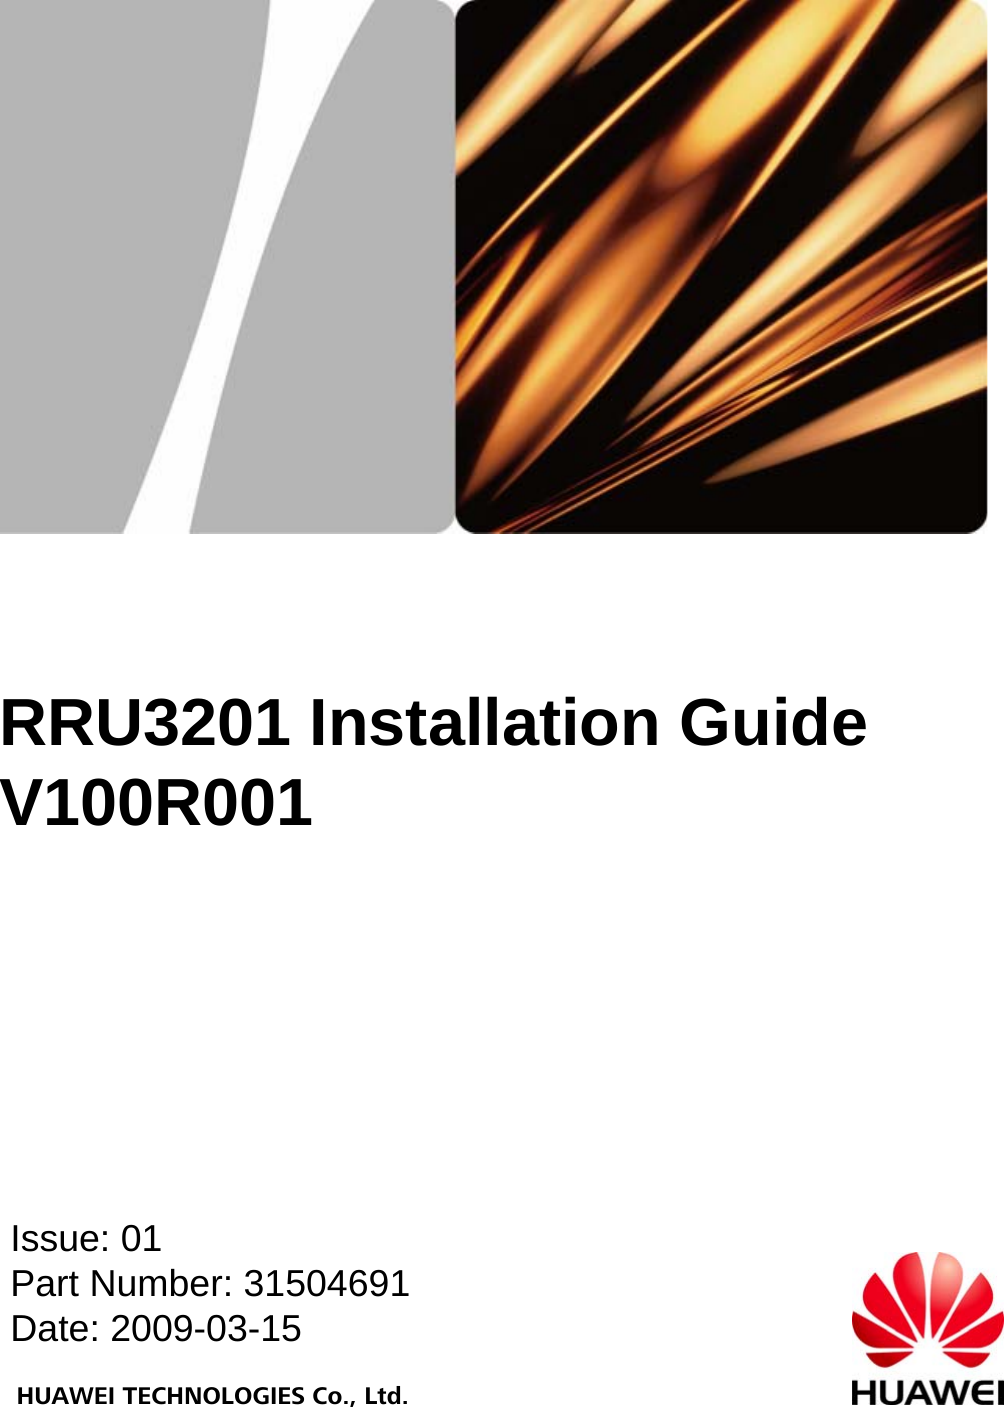 HUAWEI TECHNOLOGIES Co., Ltd.RRU3201 Installation GuideV100R001Issue: 01Part Number: 31504691Date: 2009-03-15